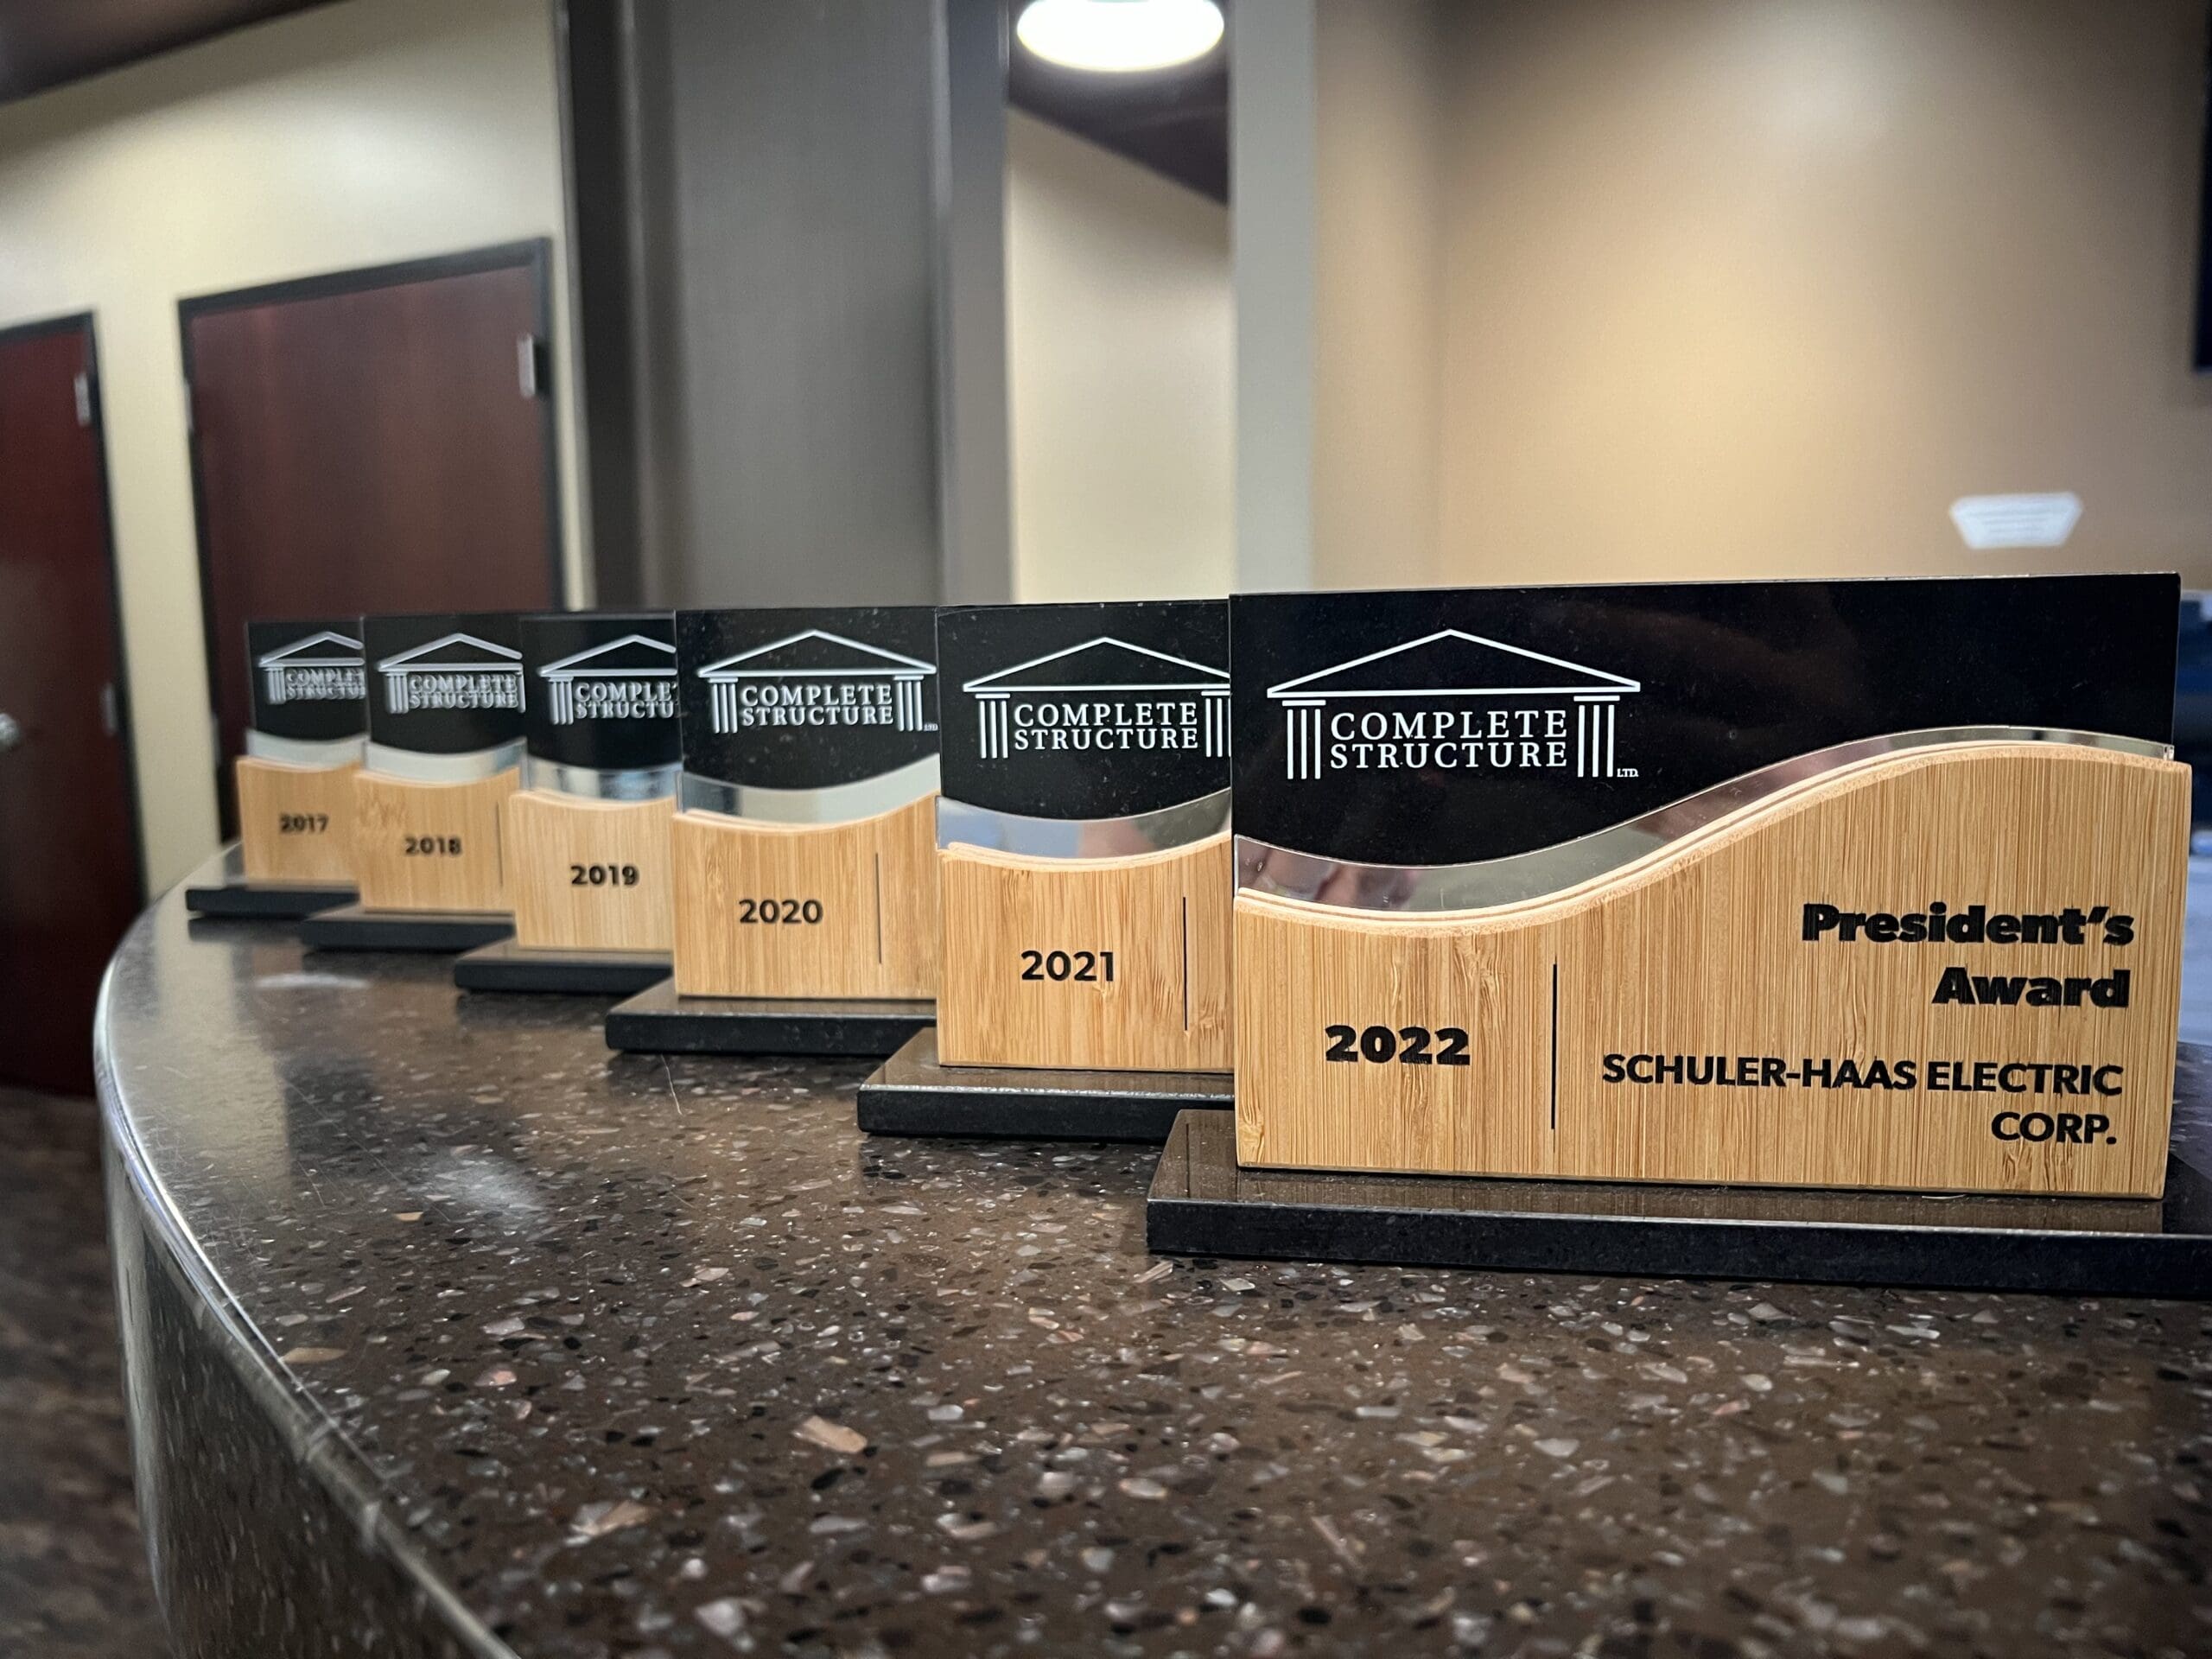 Awards by Schuler-Haas Electric Corp.